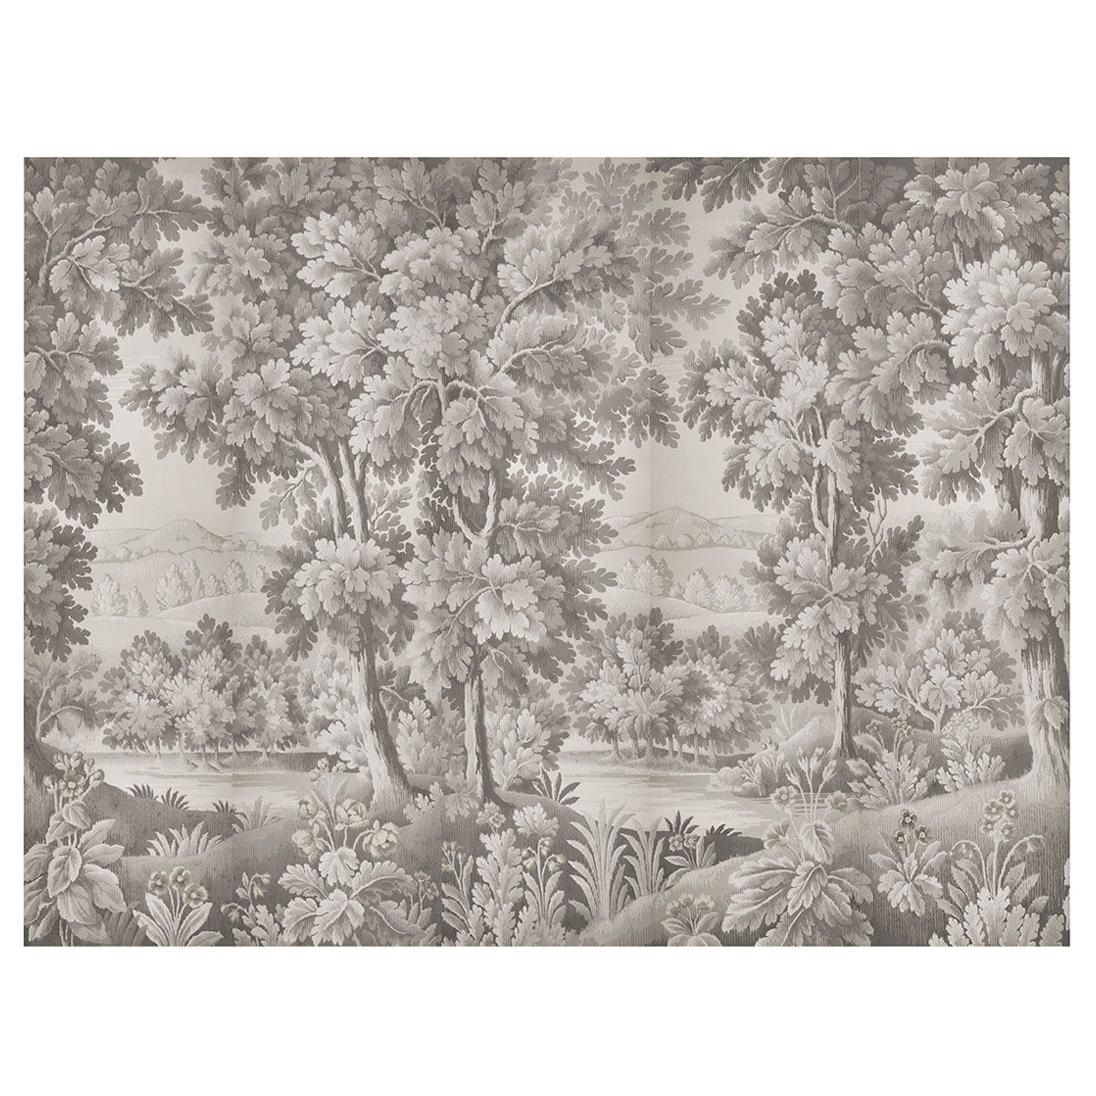 Zuber, 'La Foret des Ardennes' Hand Wood Blocked Scenic Wall Paper For Sale